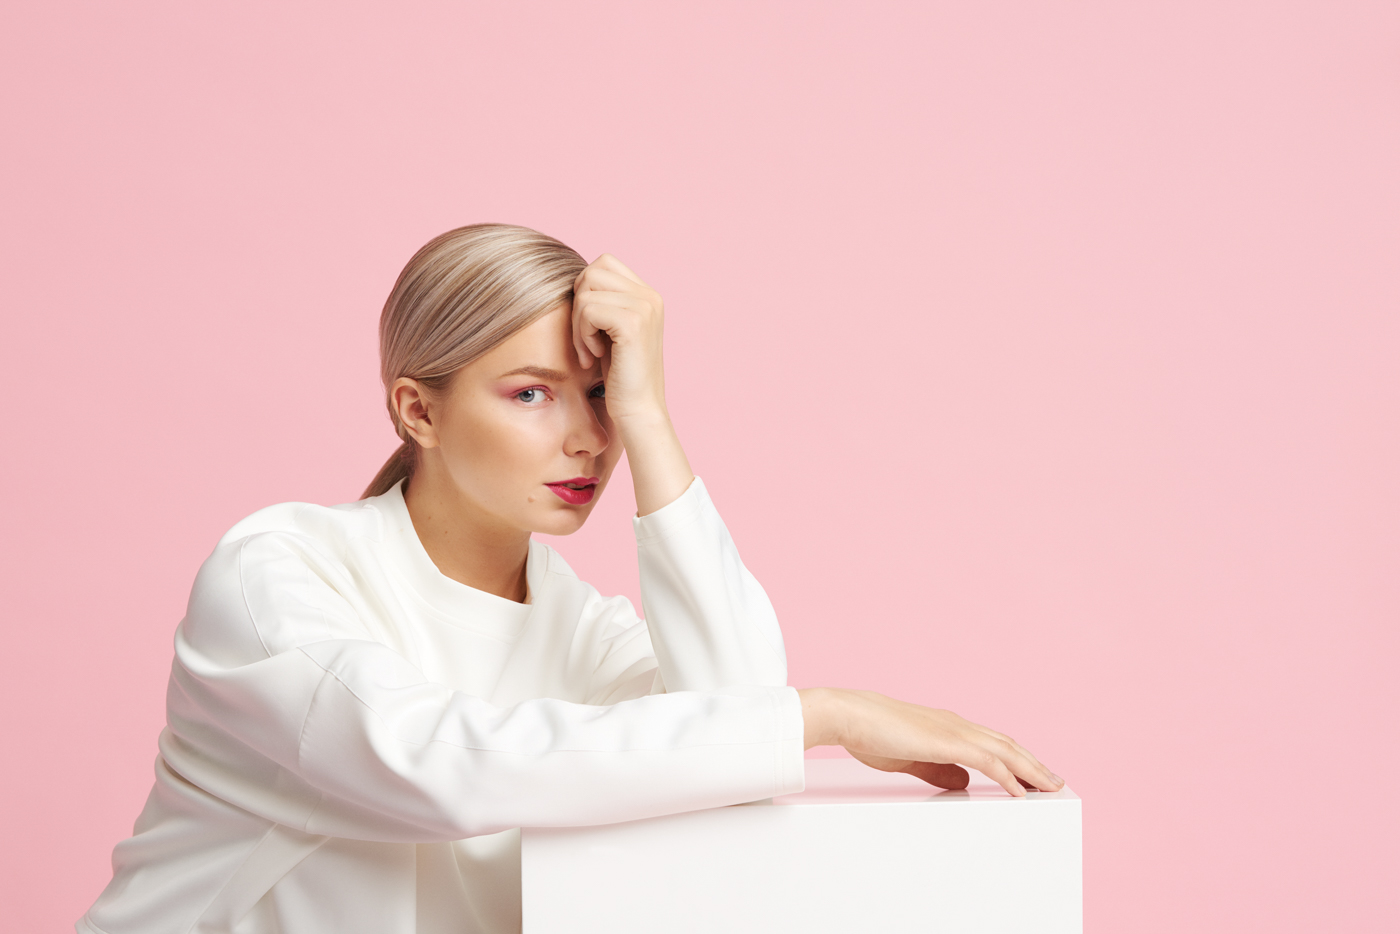 Portrait_of_Blond_Young_Woman_on_Pink_Backdrop_for_Muud_Creative_by_Sara_Lehtomaa